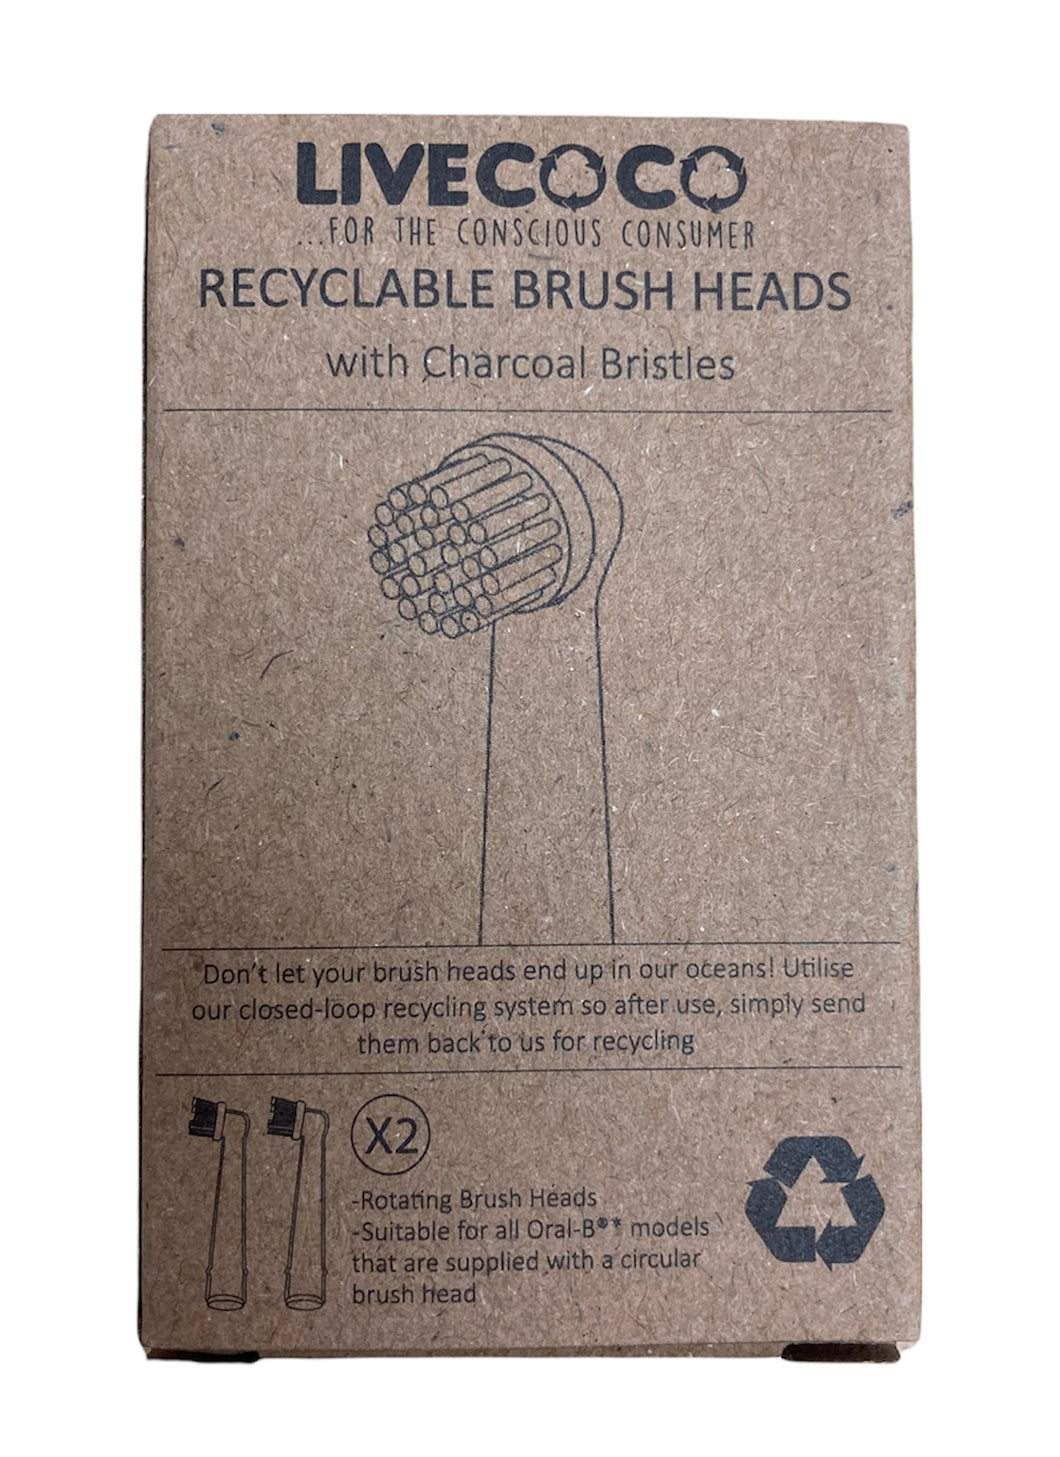 Recyclable electric toothbrush heads